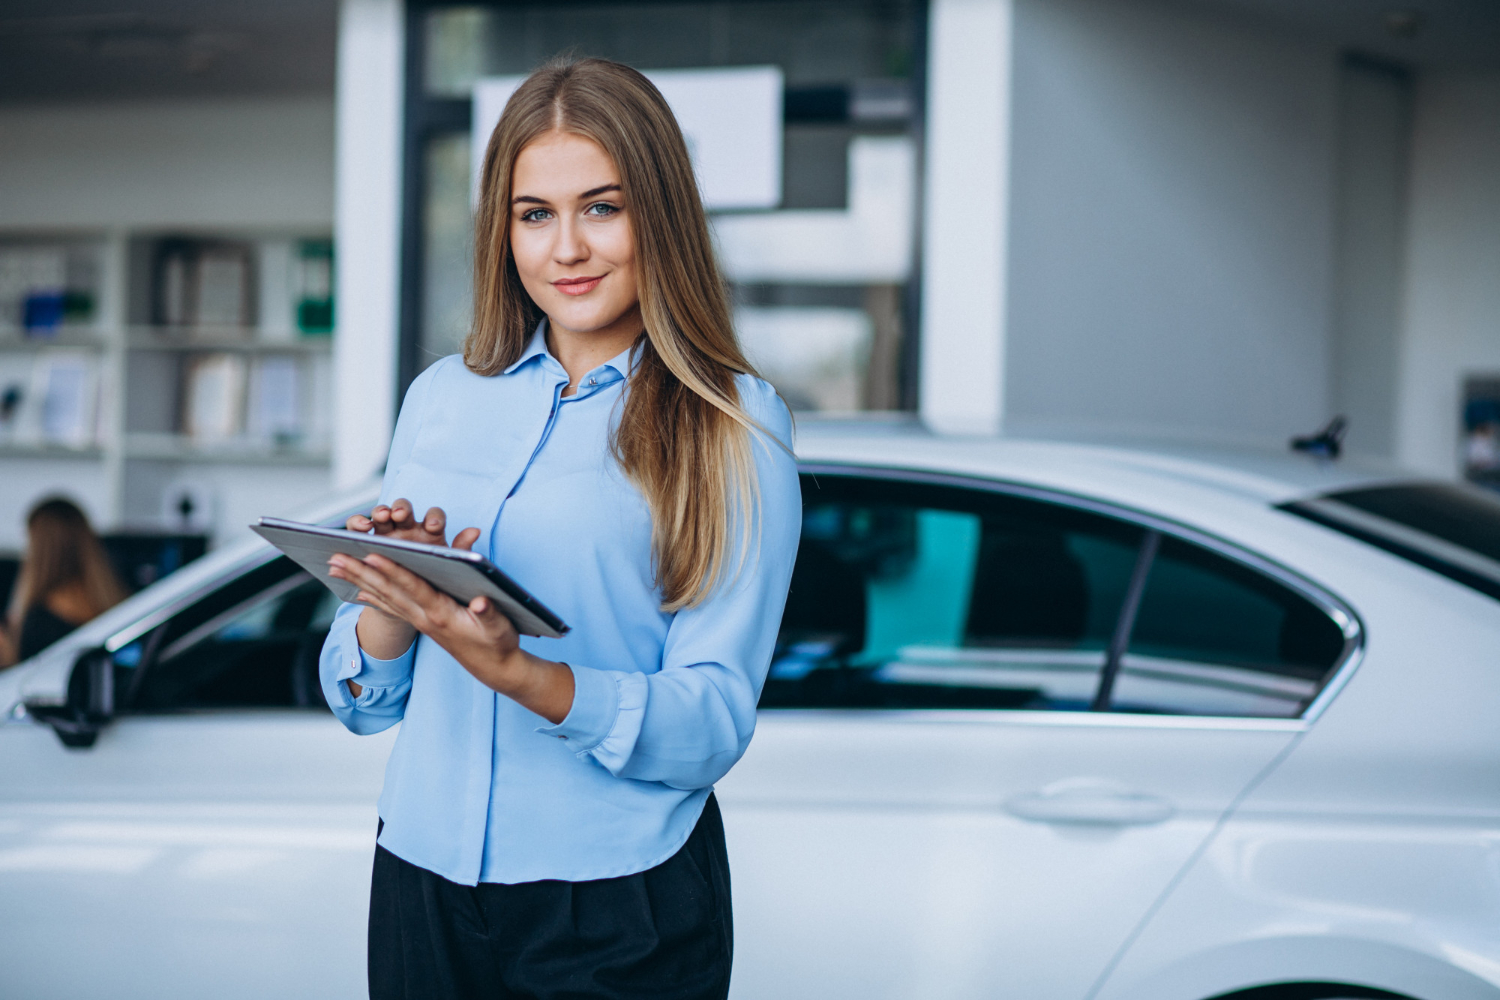 Female Salesperson At A Car Showroom By The Car